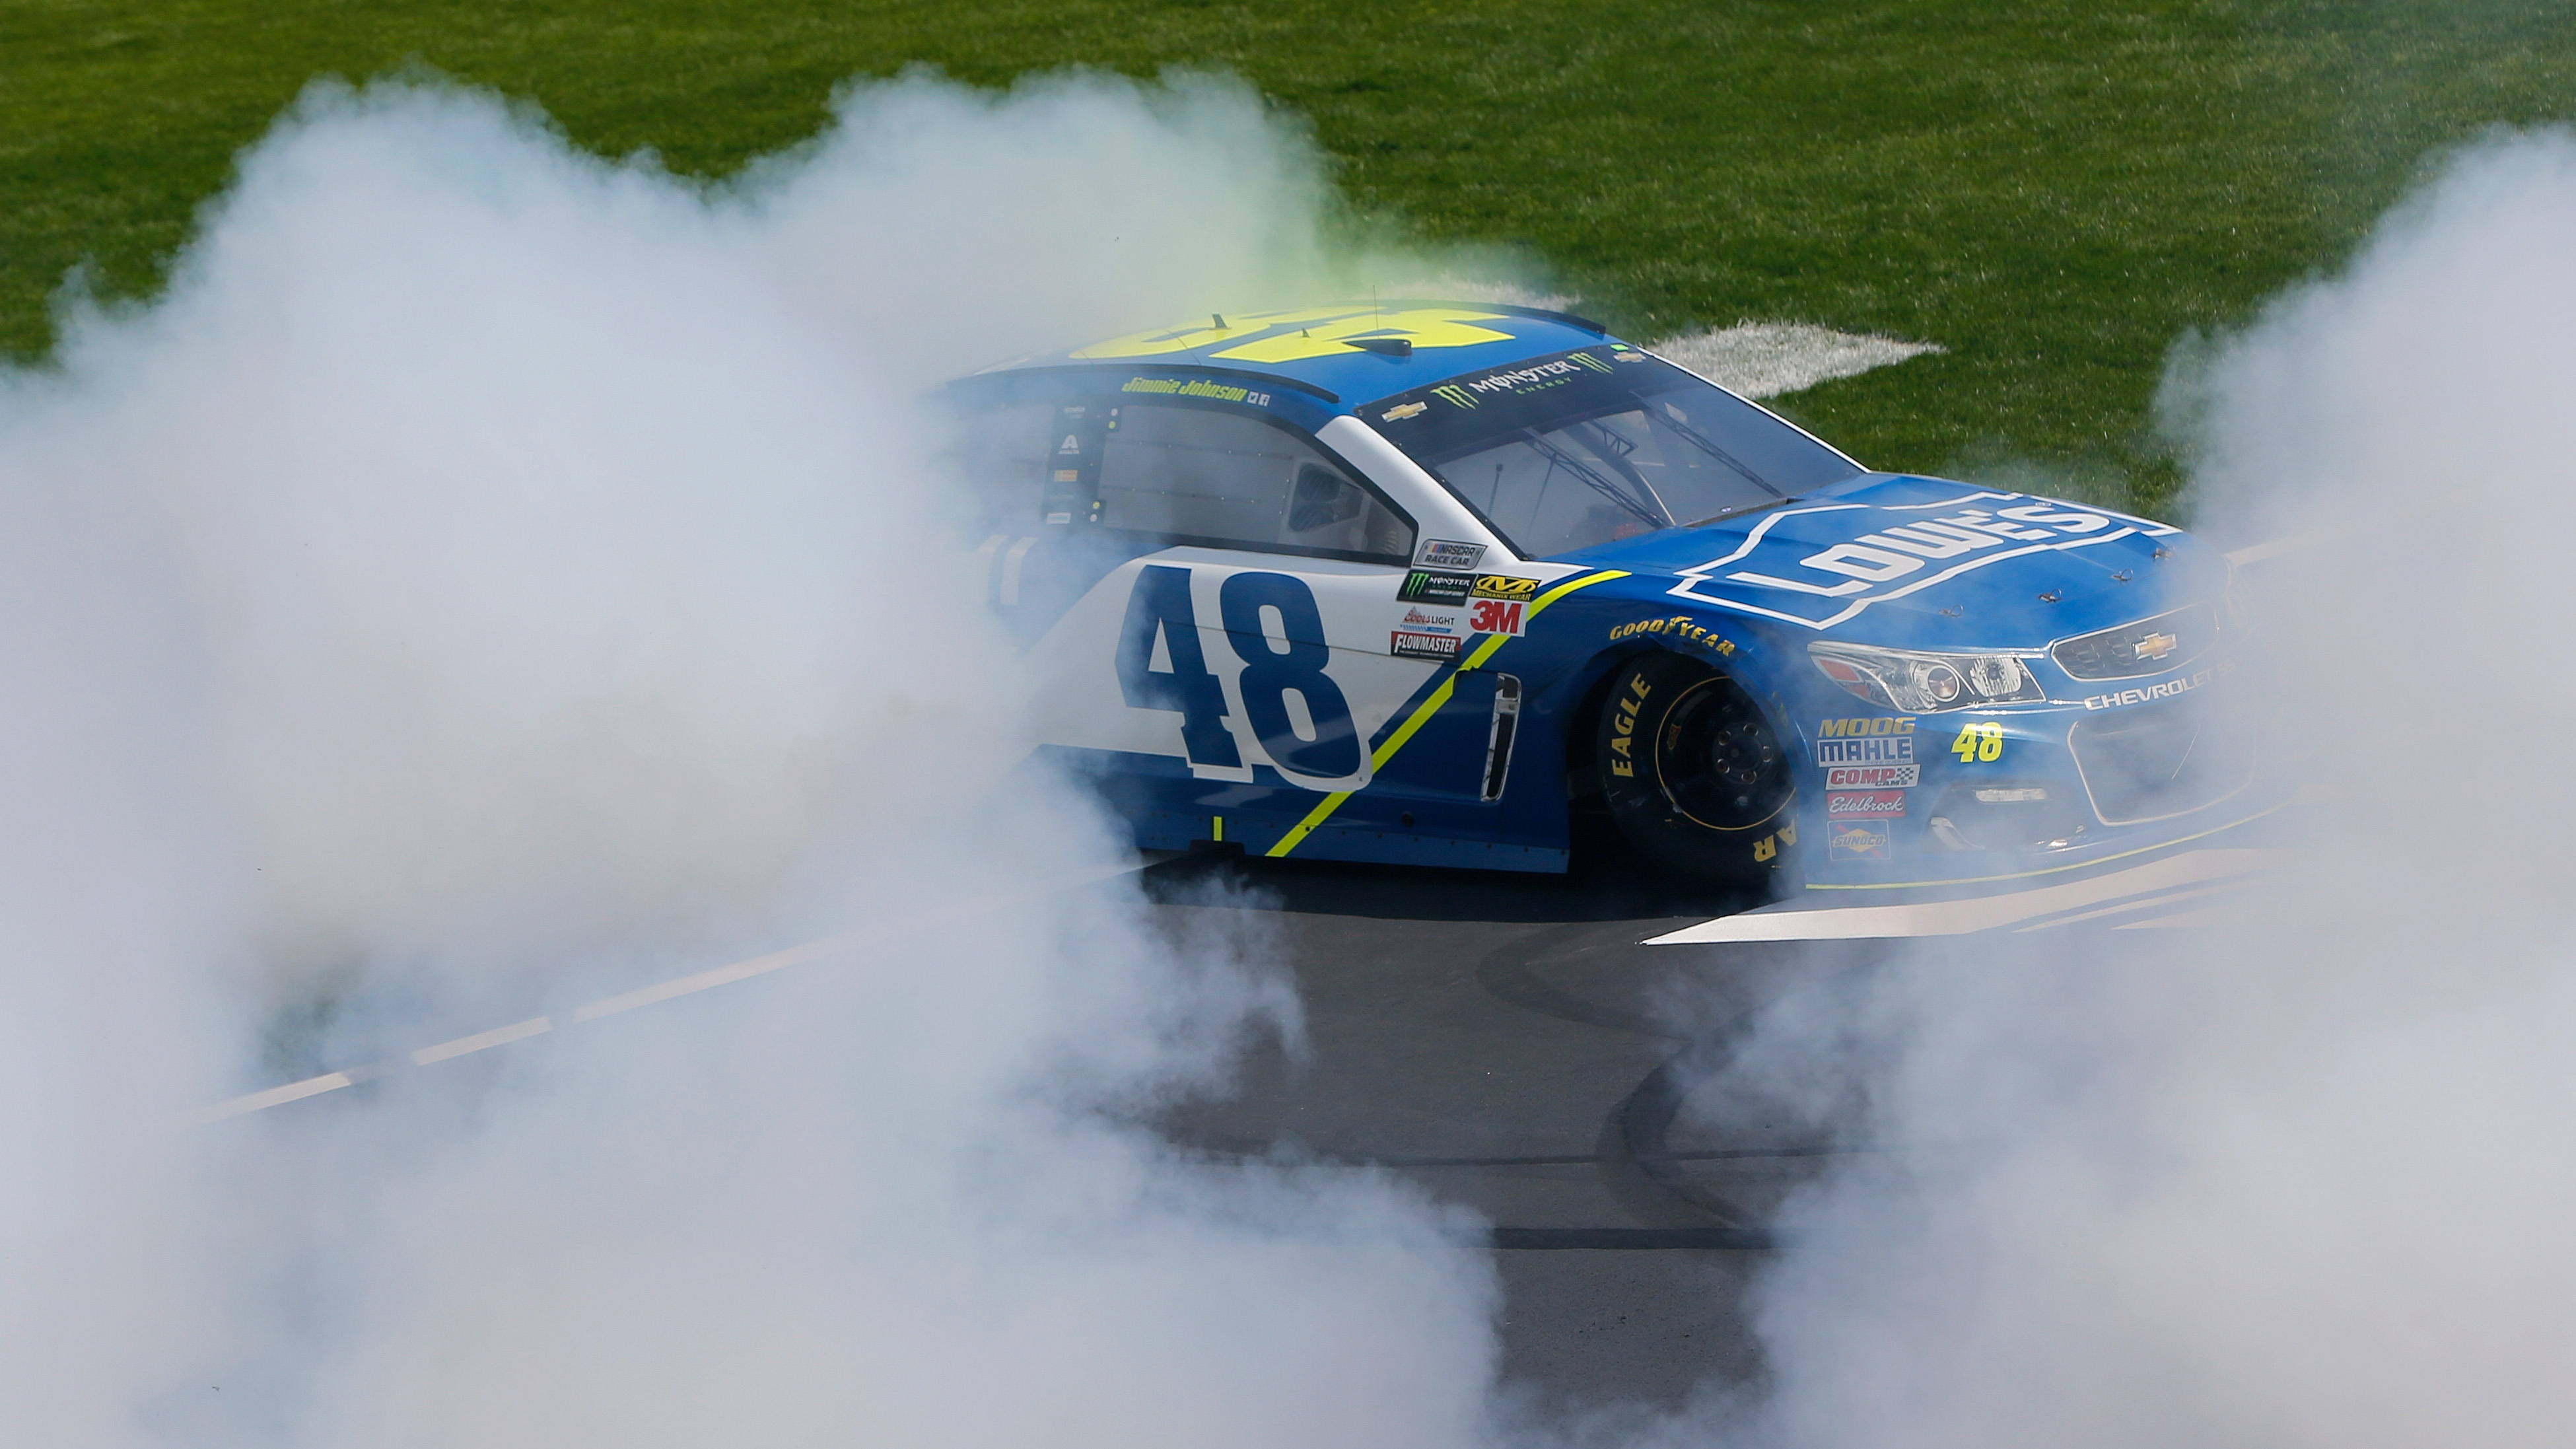 FORT WORTH, TX - APRIL 09:  Jimmie Johnson, driver of the #48 Lowe's Chevrolet, celebrates with a burn out after winning the Monster Energy NASCAR Cup Series O'Reilly Auto Parts 500 at Texas Motor Speedway on April 9, 2017 in Fort Worth, Texas.  (Photo by Jonathan Ferrey/Getty Images)